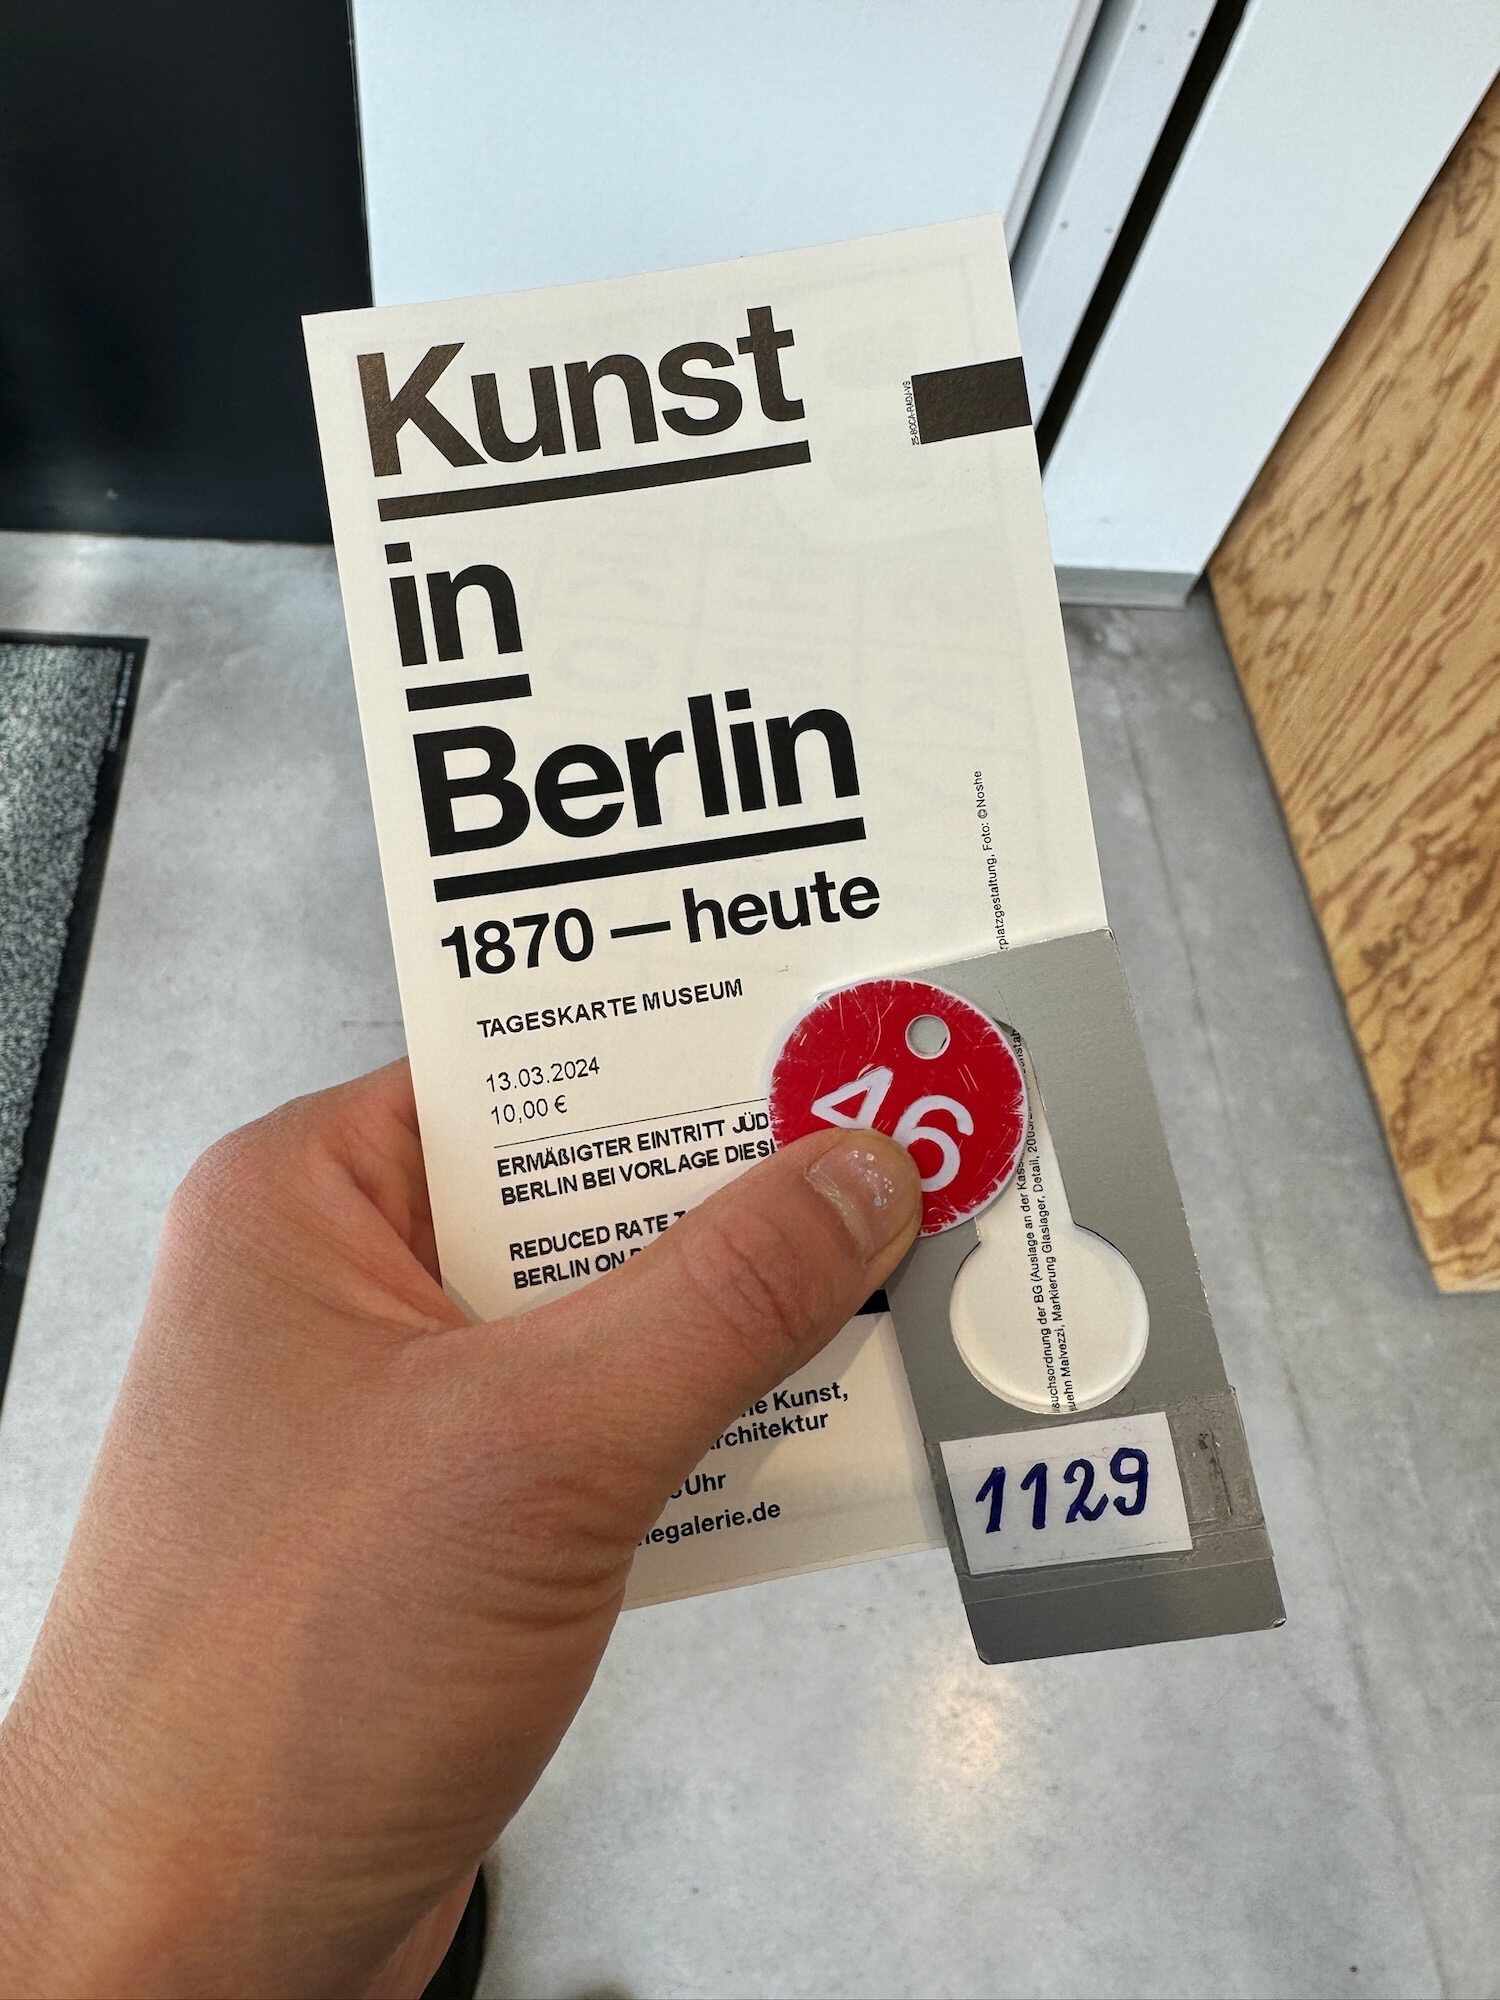 A hand holding a ticket to Berlinische Galerie and locker their room tags. The ticket says “Kunst in Berlin, 1870-heute”